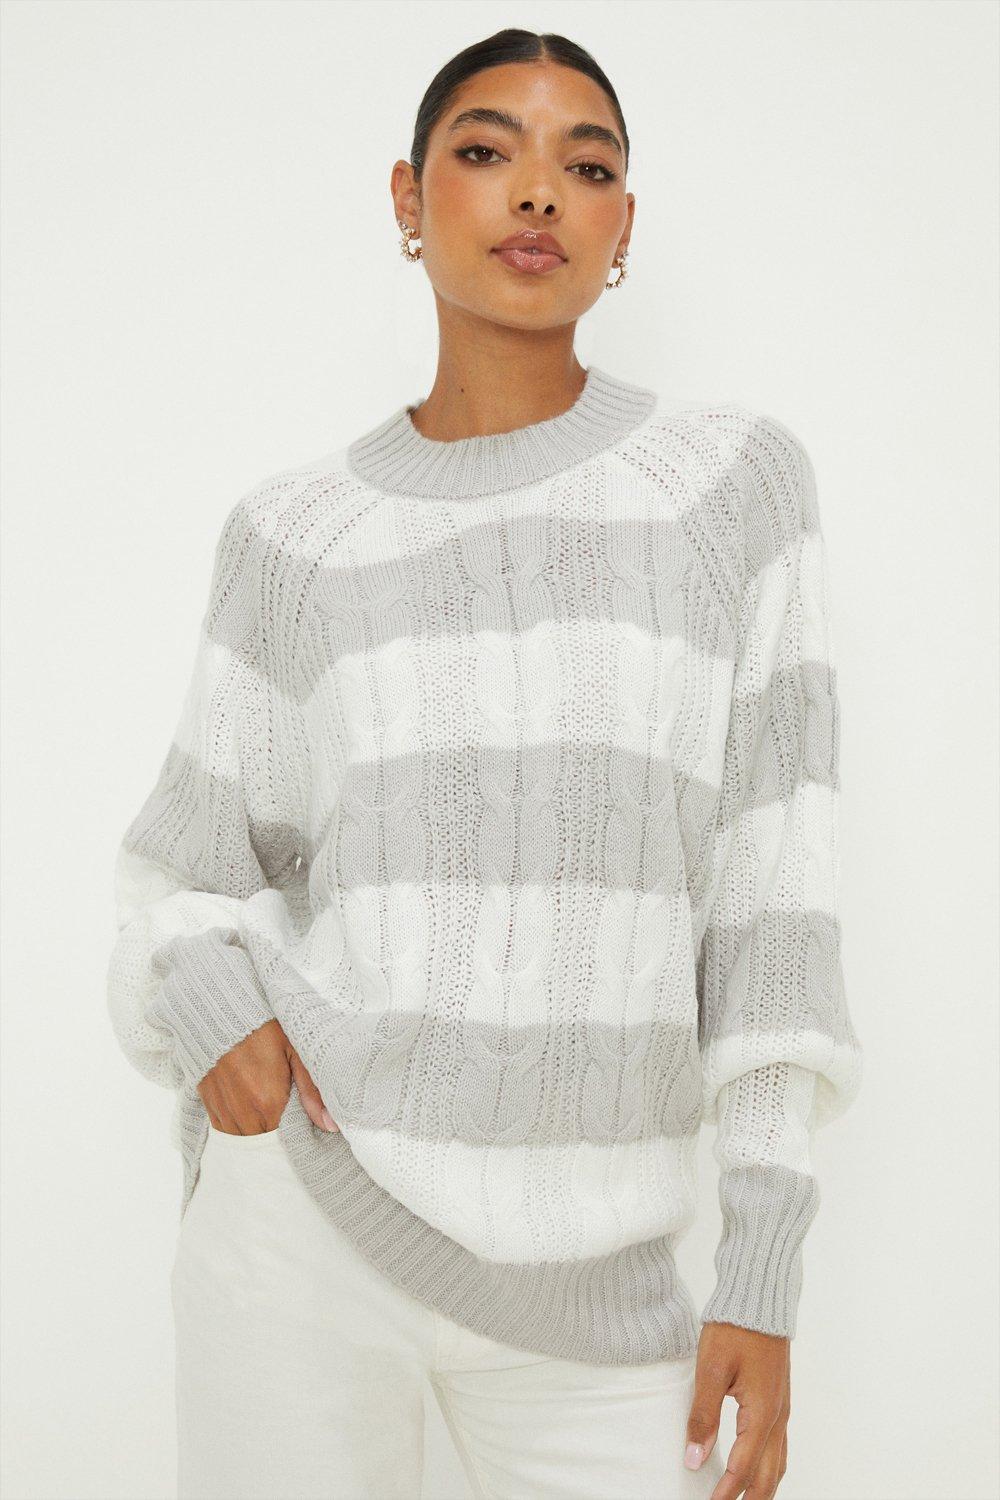 Women’s Stripe Cable High Neck Tunic Jumper - grey - M